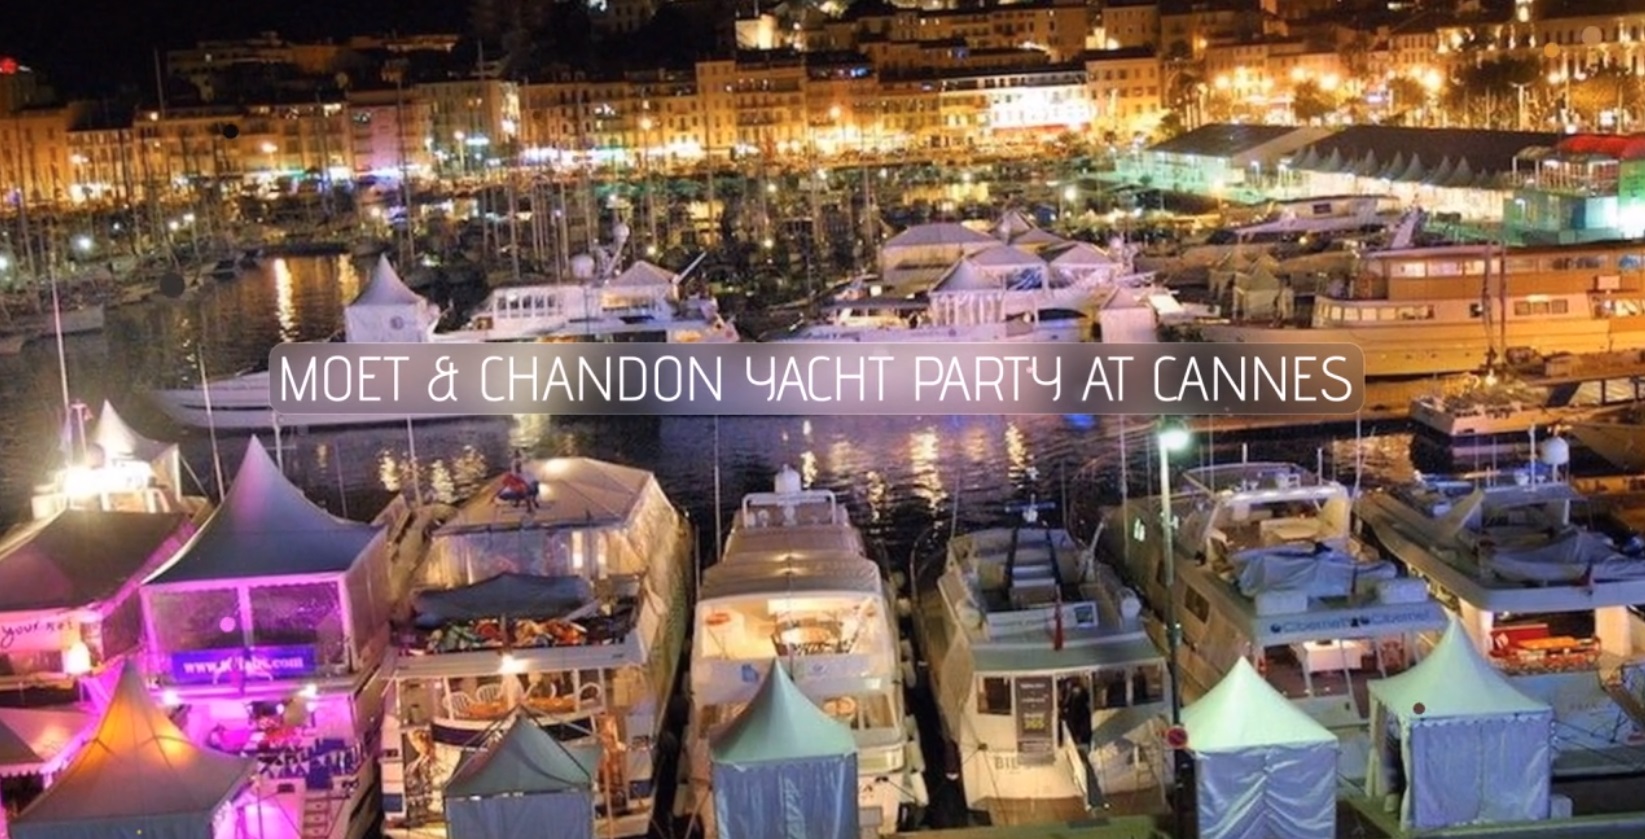 tickets for moet & chandon yacht party at cannes film festival